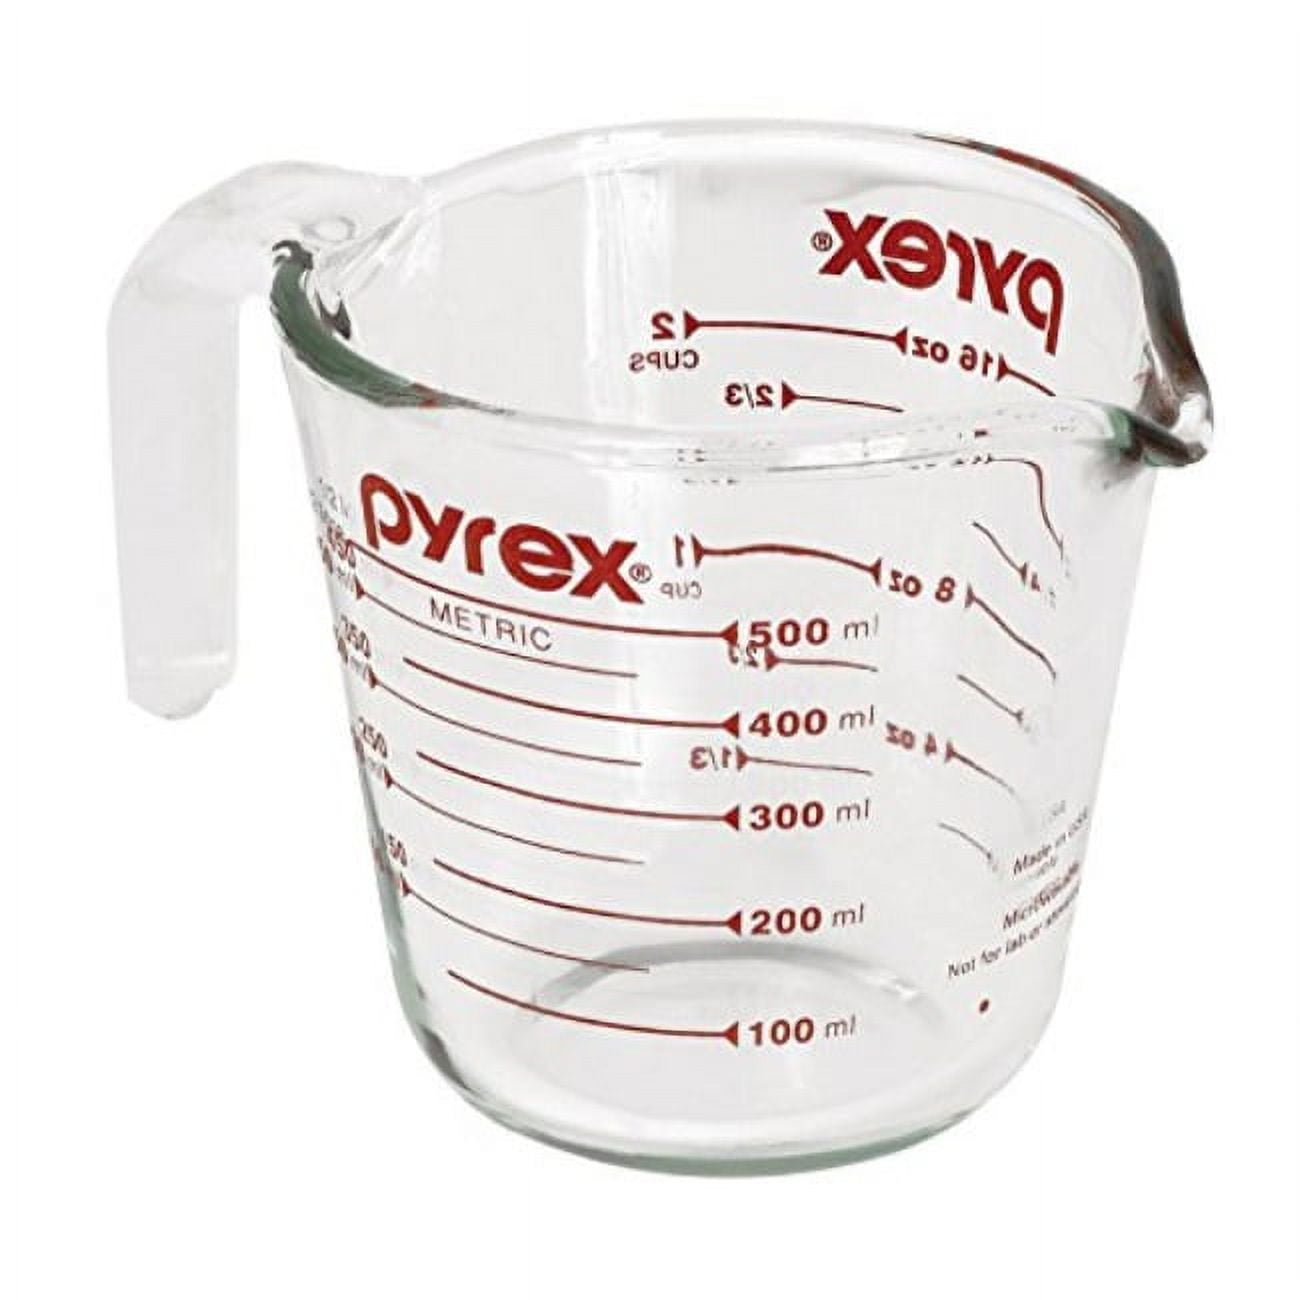 Pyrex Prepware 1-Cup Glass Measuring Cup (Pack of 2), with Supreme Box Safe  Packaging